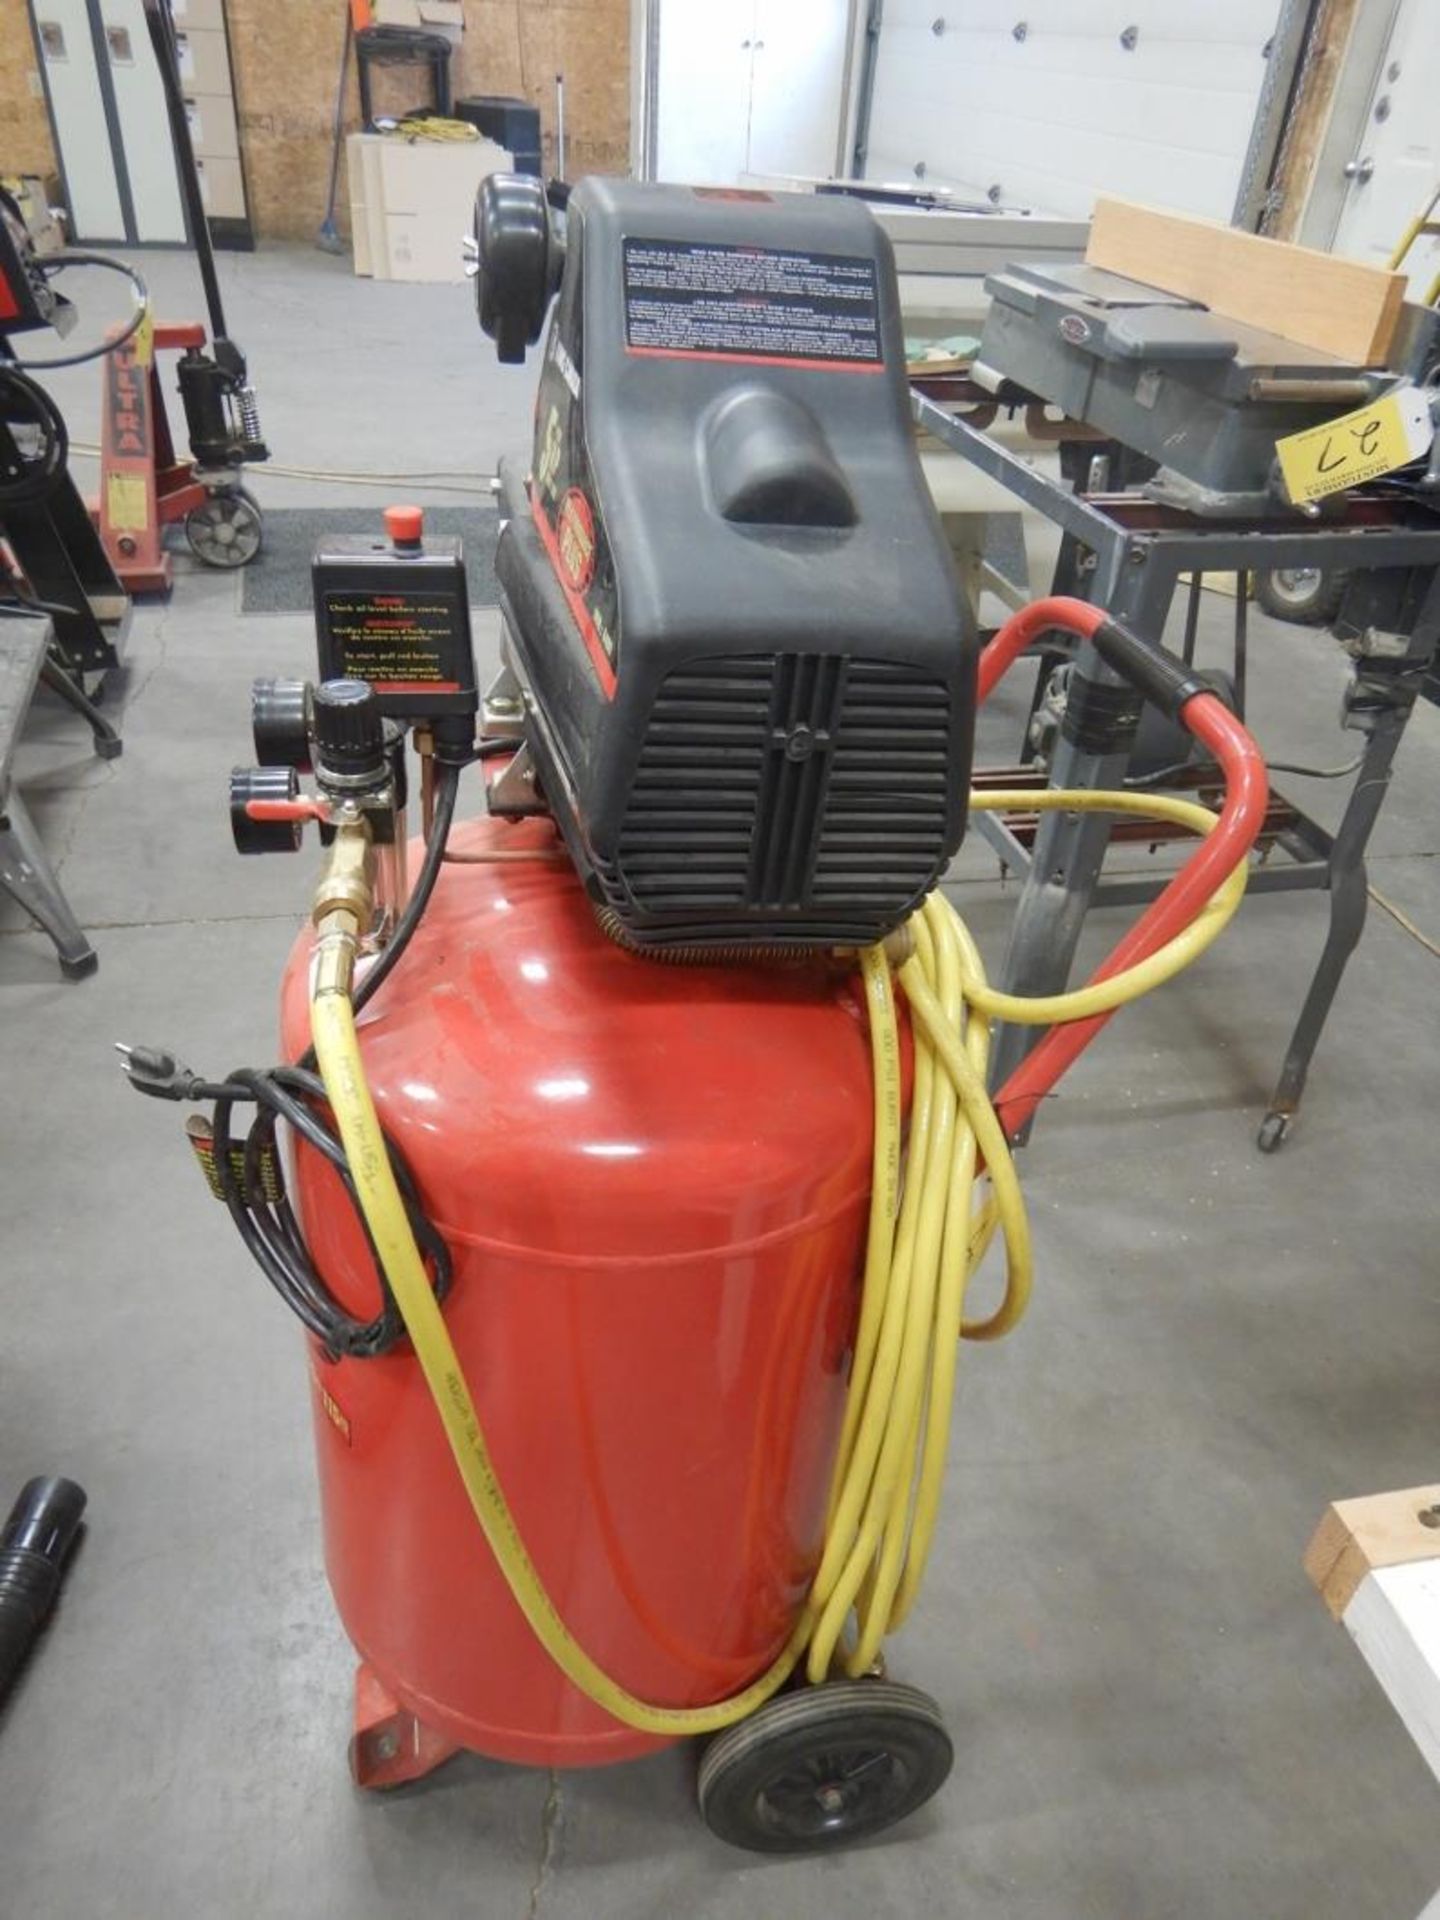 KING CANADA PERFORMANCE PLUS UPRIGHT 5HP AIR COMPRESSOR W/ HOSE - Image 8 of 8